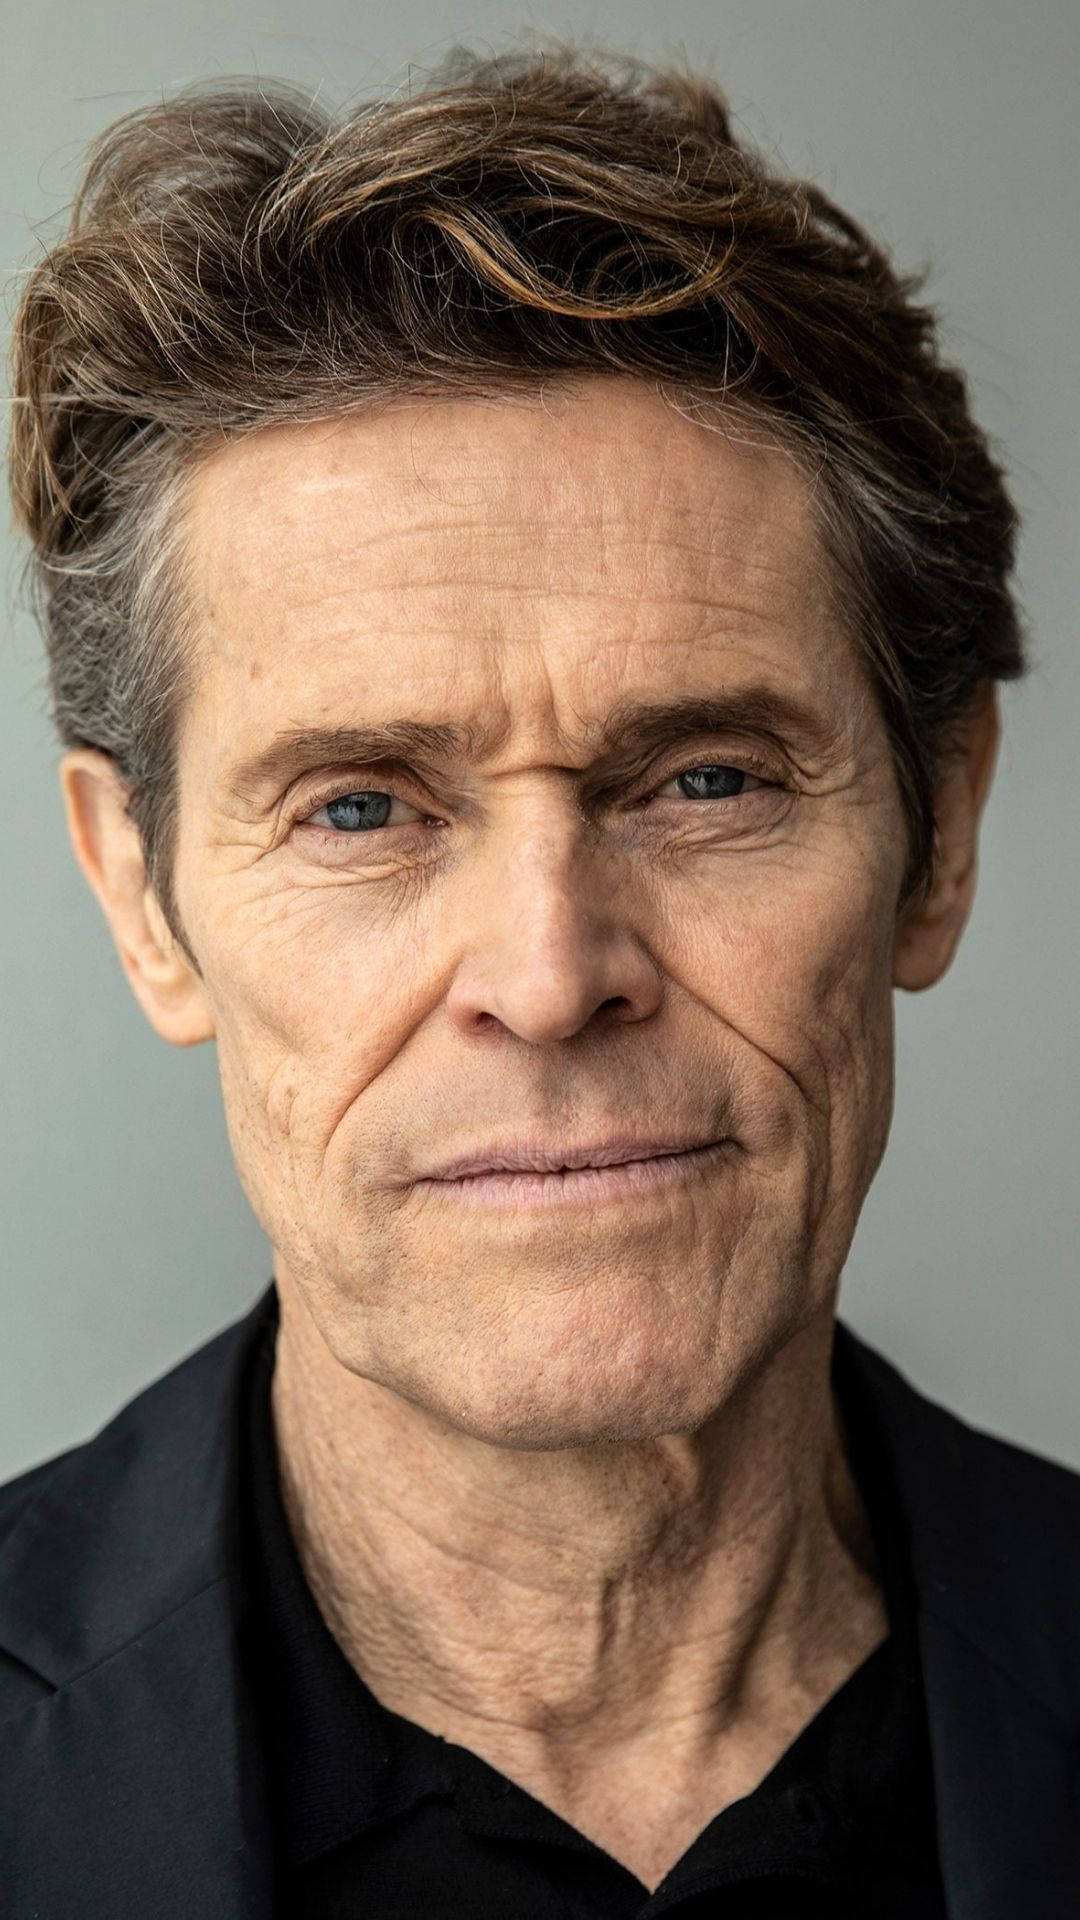 Acclaimed Actor Willem Dafoe in a Close-Up Portrait Wallpaper